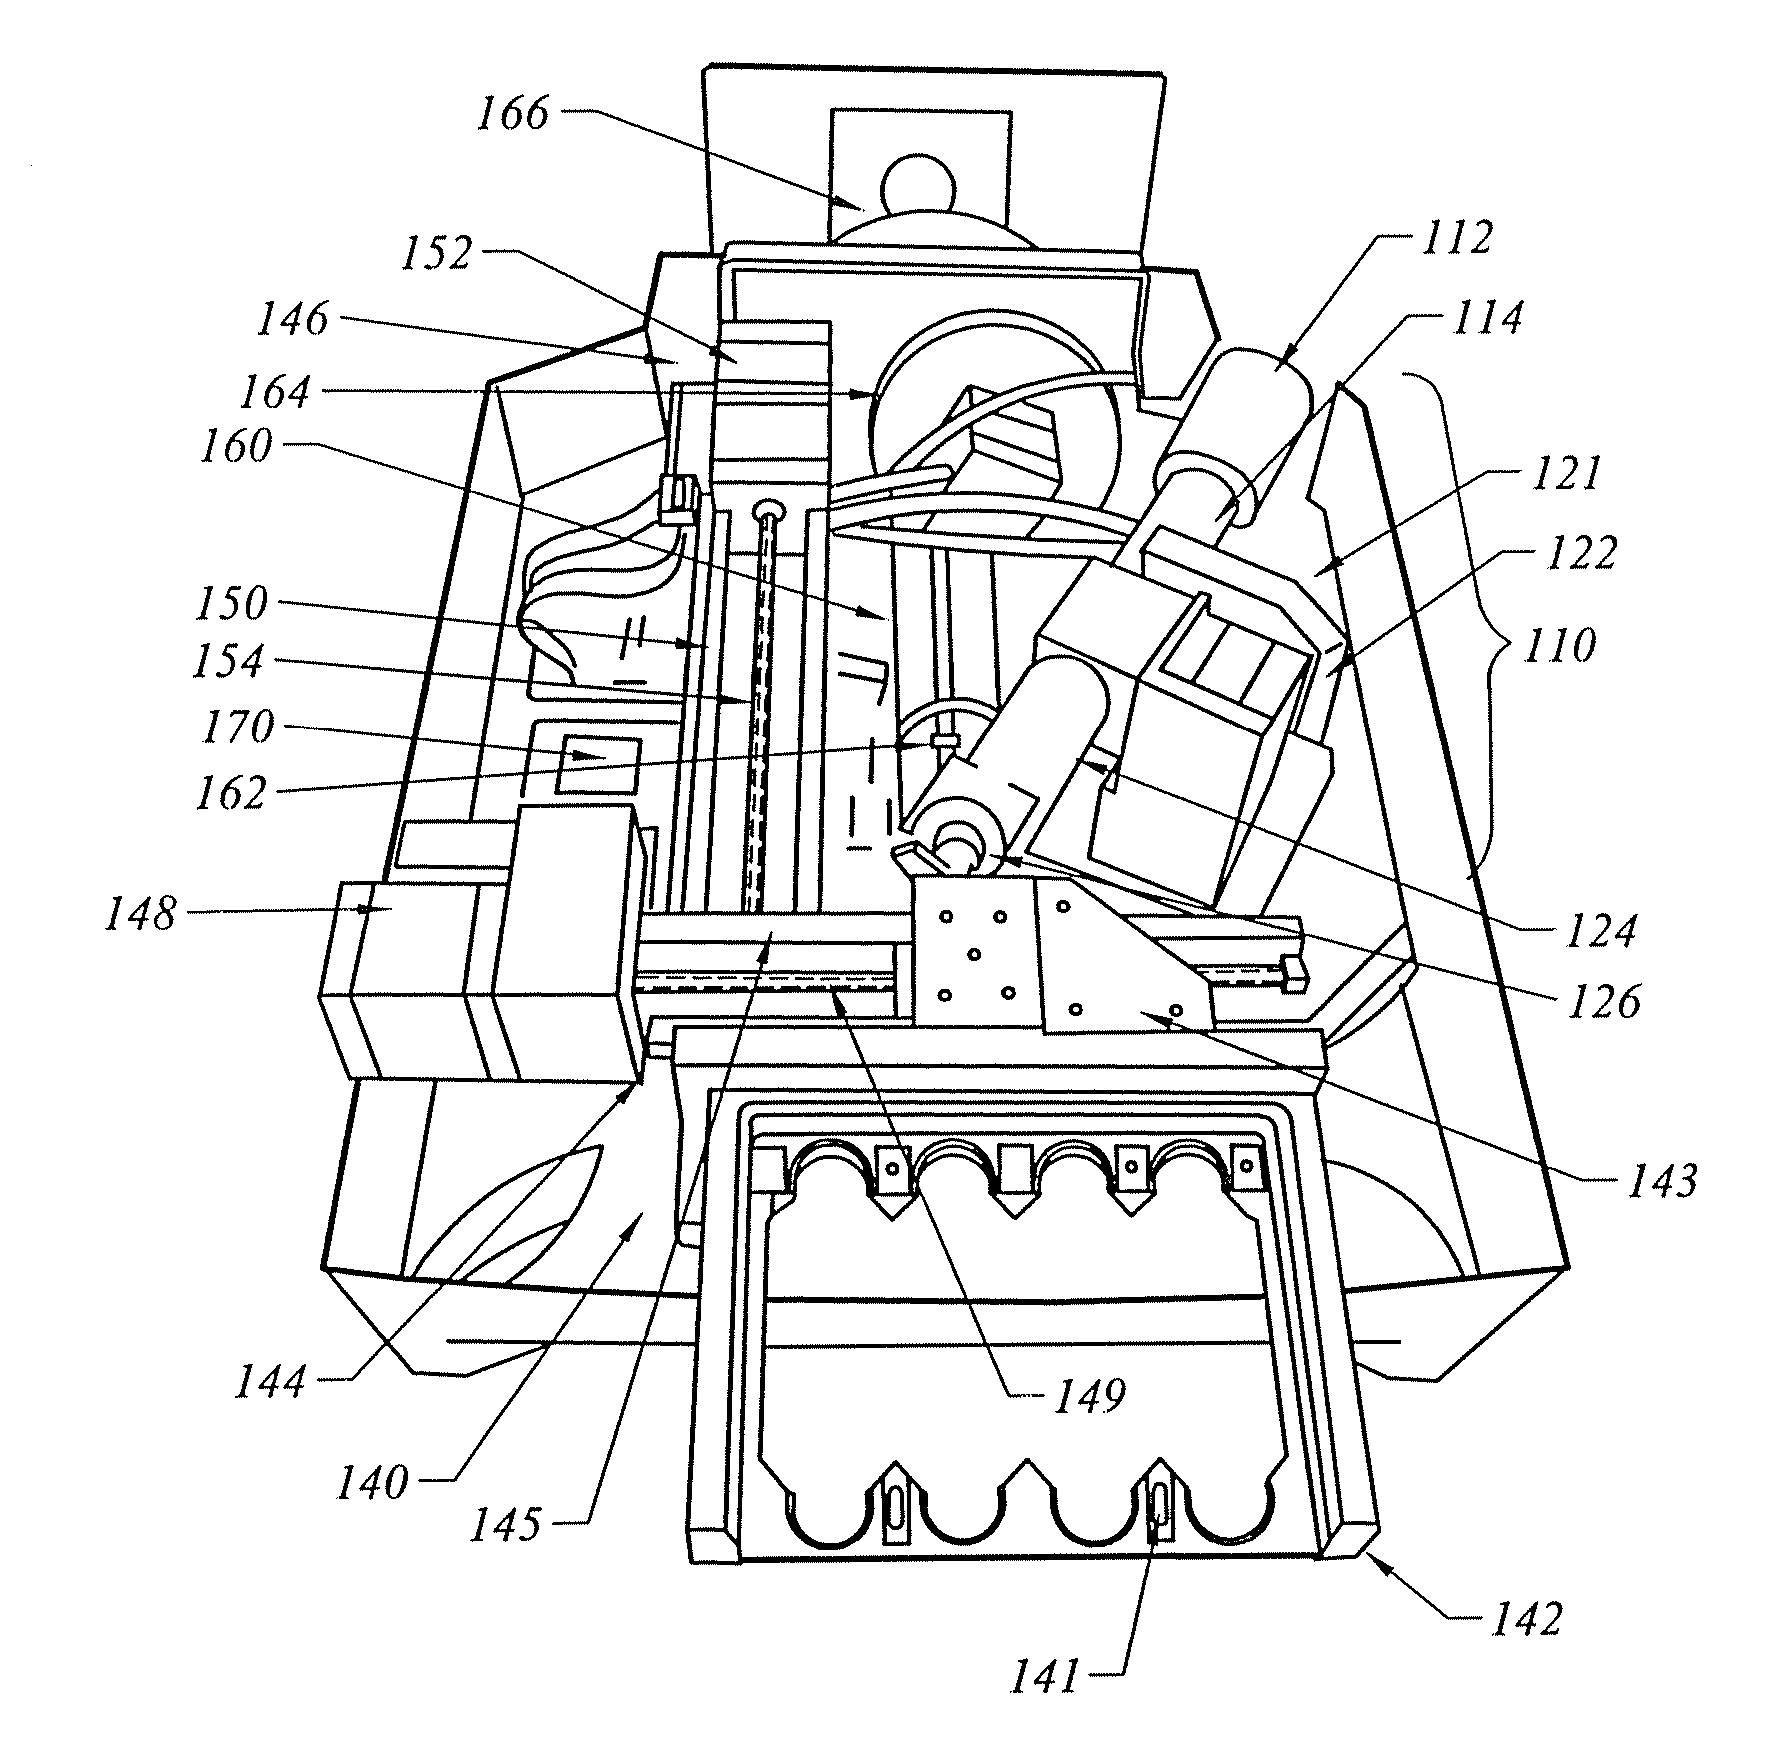 Apparatus for reading signals generated from resonance light scattered particle labels